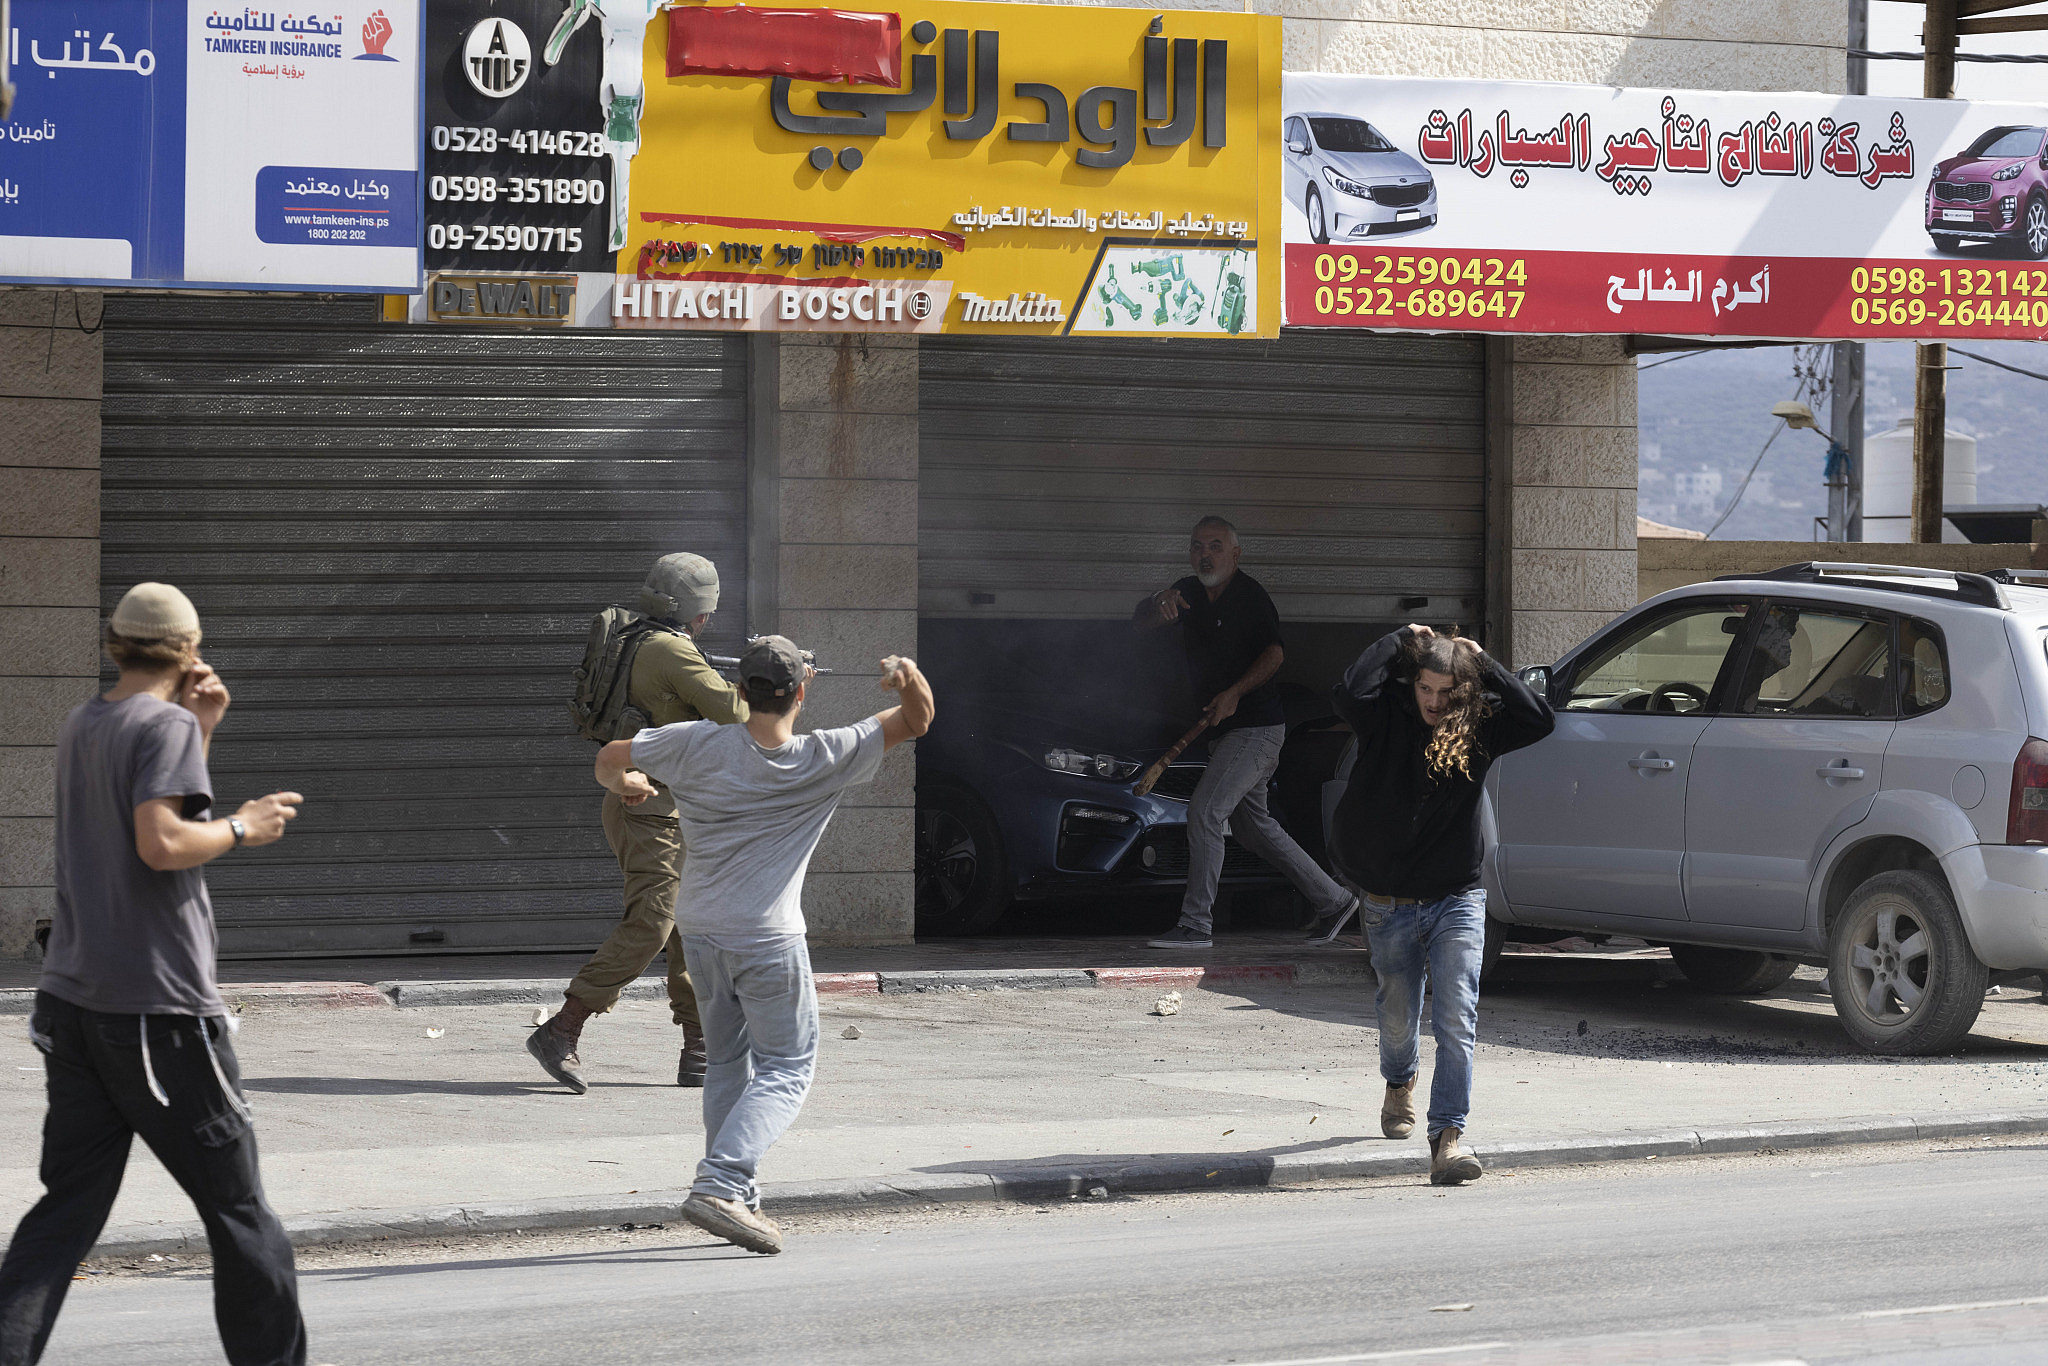 Israeli settlers, backed by Israeli army forces, attack Palestinian residents, cars and shops in the West Bank town of Huwara, near Nablus, October 13, 2022. (Oren Ziv/Activestills)